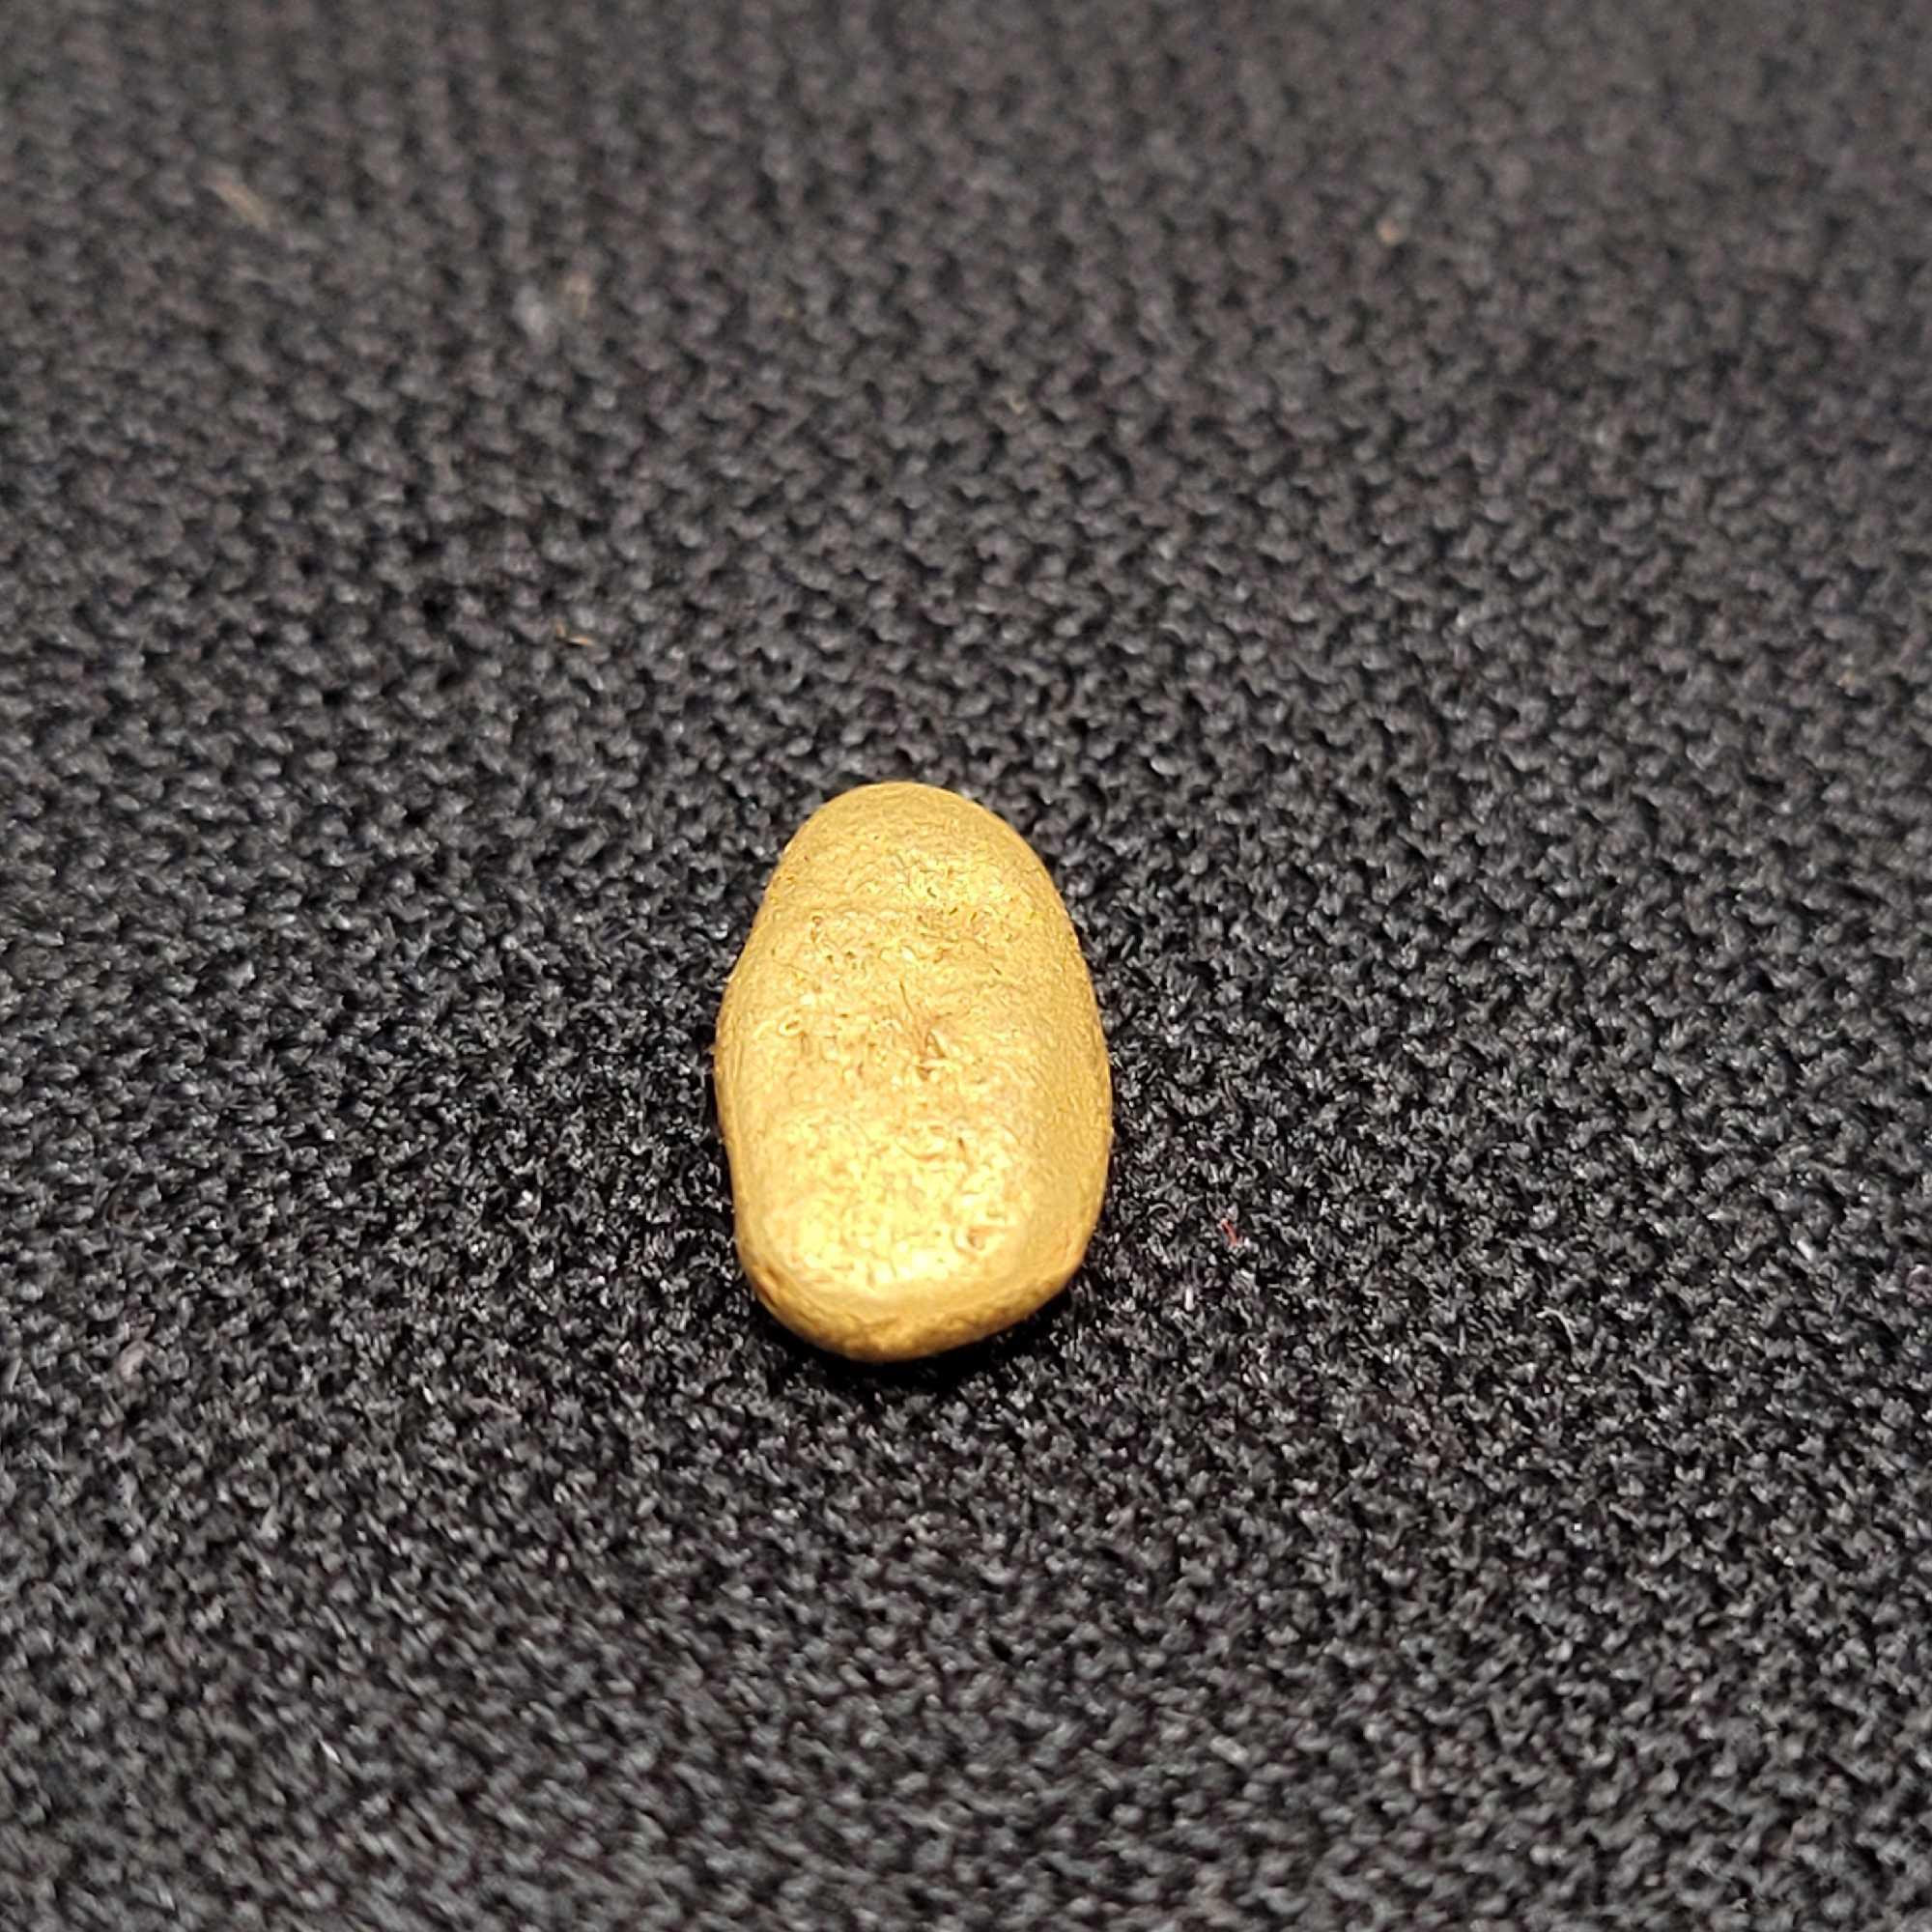 Alaskan Yellow Gold Nugget .80+ Gram Larger Nugget 18+ Kt High Quality Gold